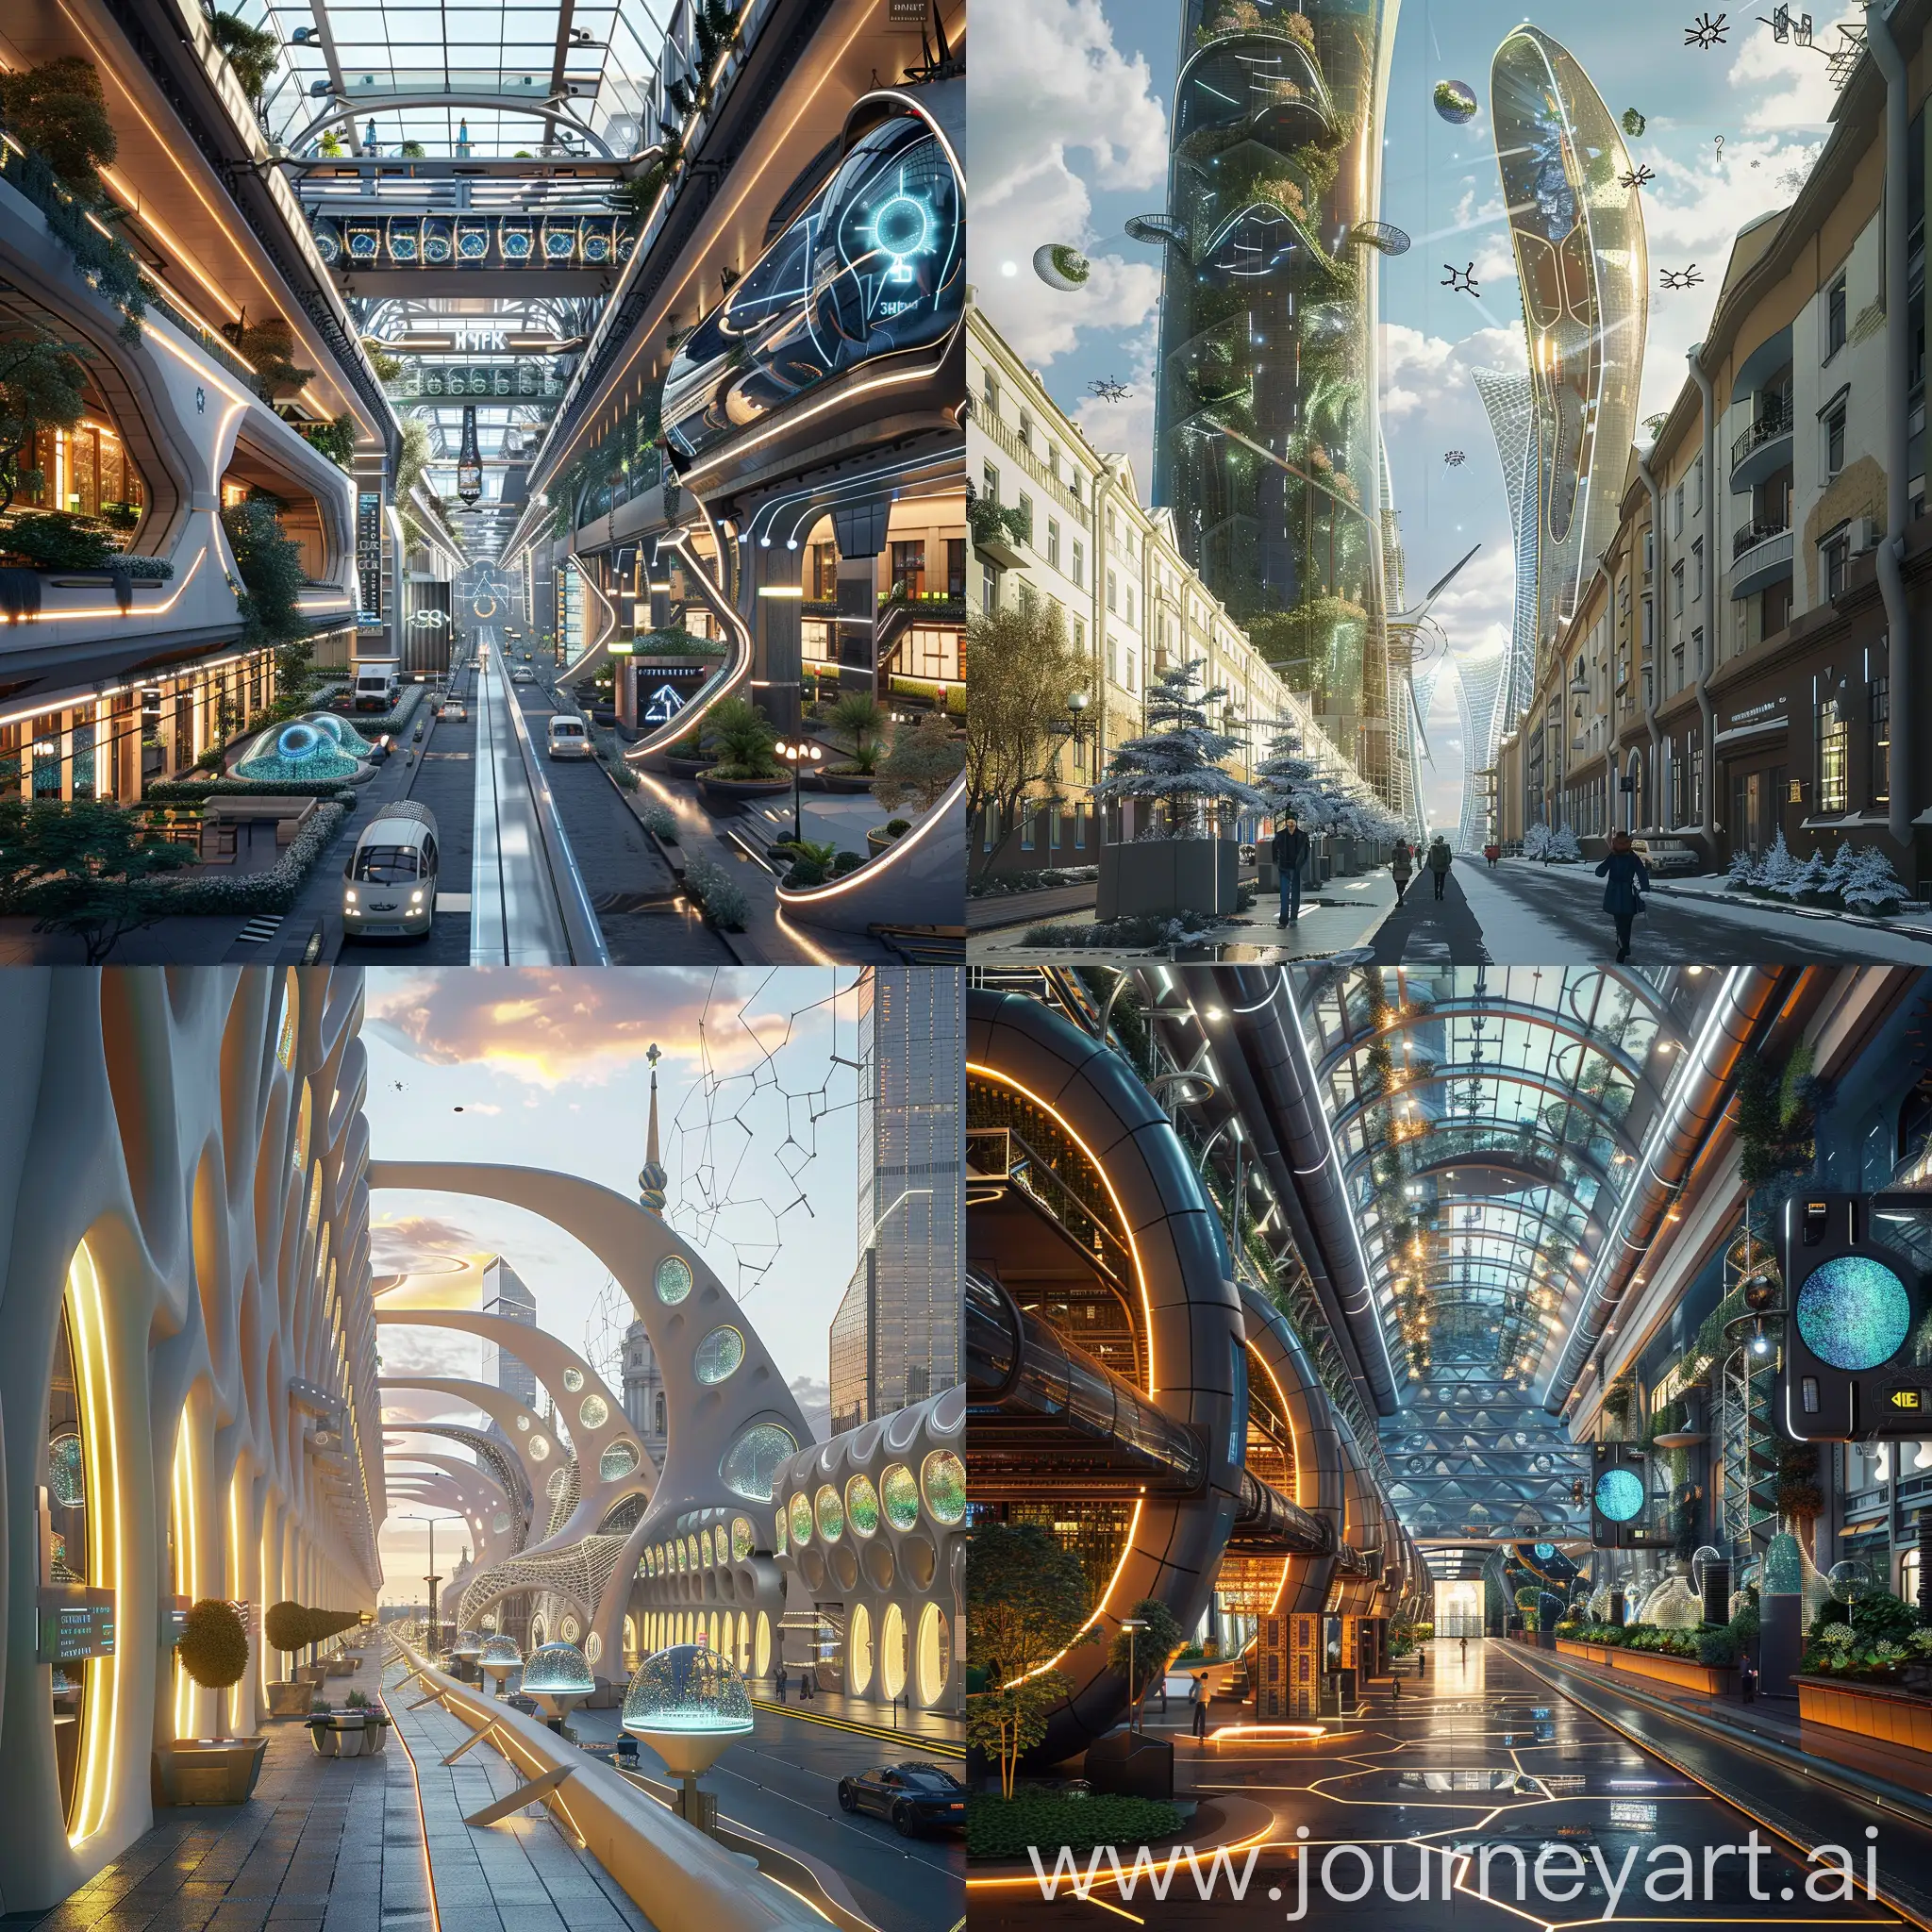 High-tech futuristic Saint Petersburg, Bioluminescent Walls, VR-Infused Public Spaces, Vertical Gardens & Hydroponics, Modular Apartments & Co-Living, AI-Powered Climate Control, Interactive Furniture, 3D-Printed Infrastructure, Nanotech-Enhanced Surfaces, Augmented Reality Shopping, Hyperloop Transportation Hubs, Kinetic Facades, Self-Cleaning Exteriors, Urban Wind Turbines, Vertical Farms & Sky Gardens, Hyperloop Tubes & Stations, Kinetic Energy Harvesting Pavements, Smart Traffic Lights & Pedestrian Walkways, Weather-Adaptive Roofs, Drone Delivery Stations & Landing Pads, "Living" Monuments, unreal engine 5 --stylize 1000